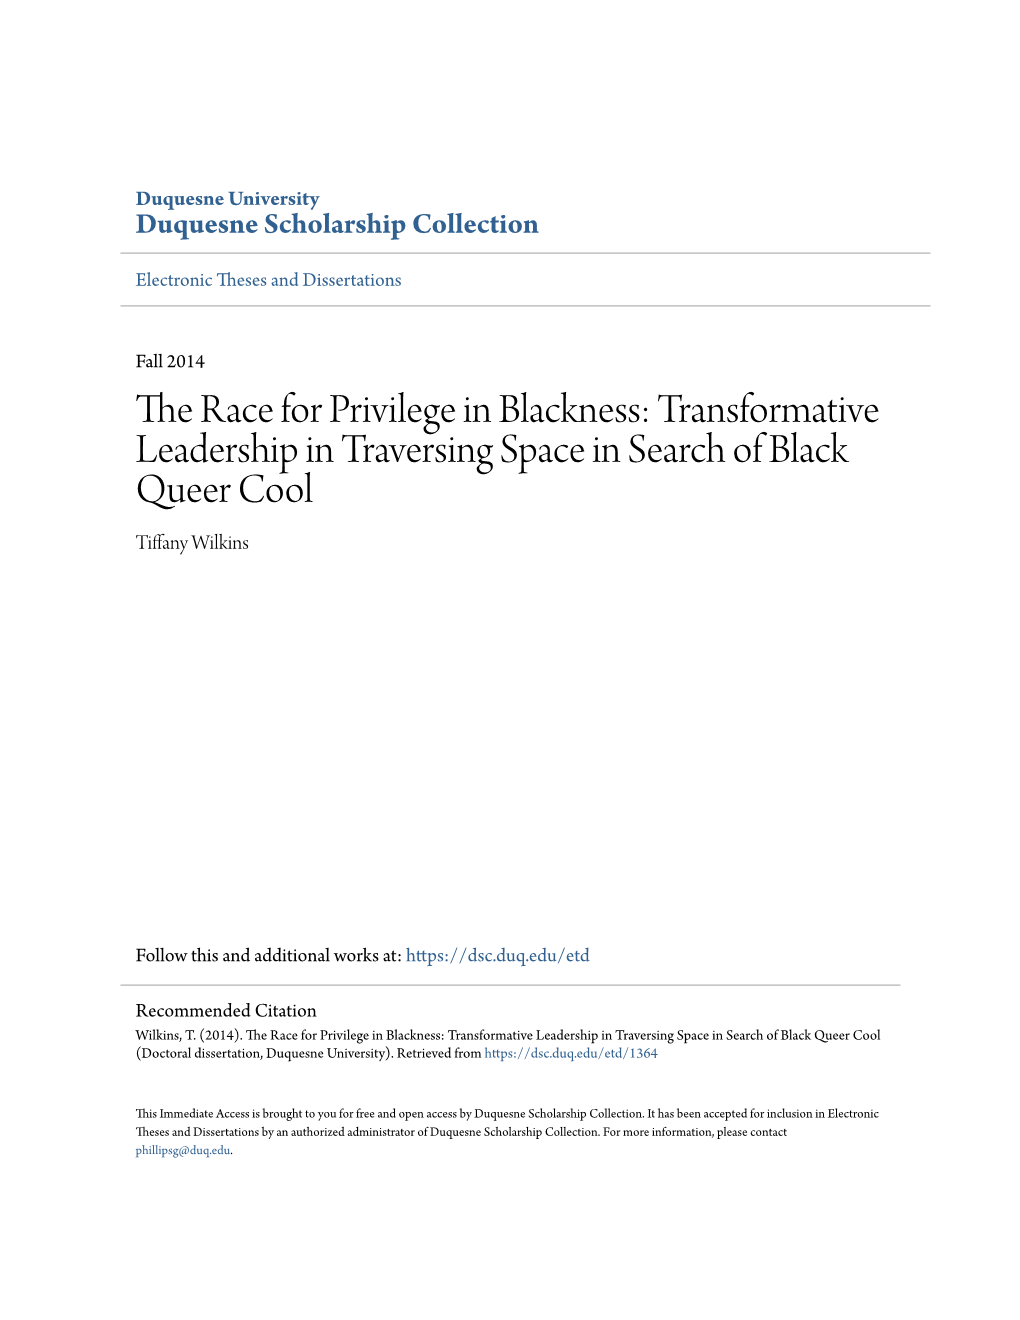 The Race for Privilege in Blackness: Transformative Leadership in Traversing Space in Search of Black Queer Cool Tiffany Wilkins